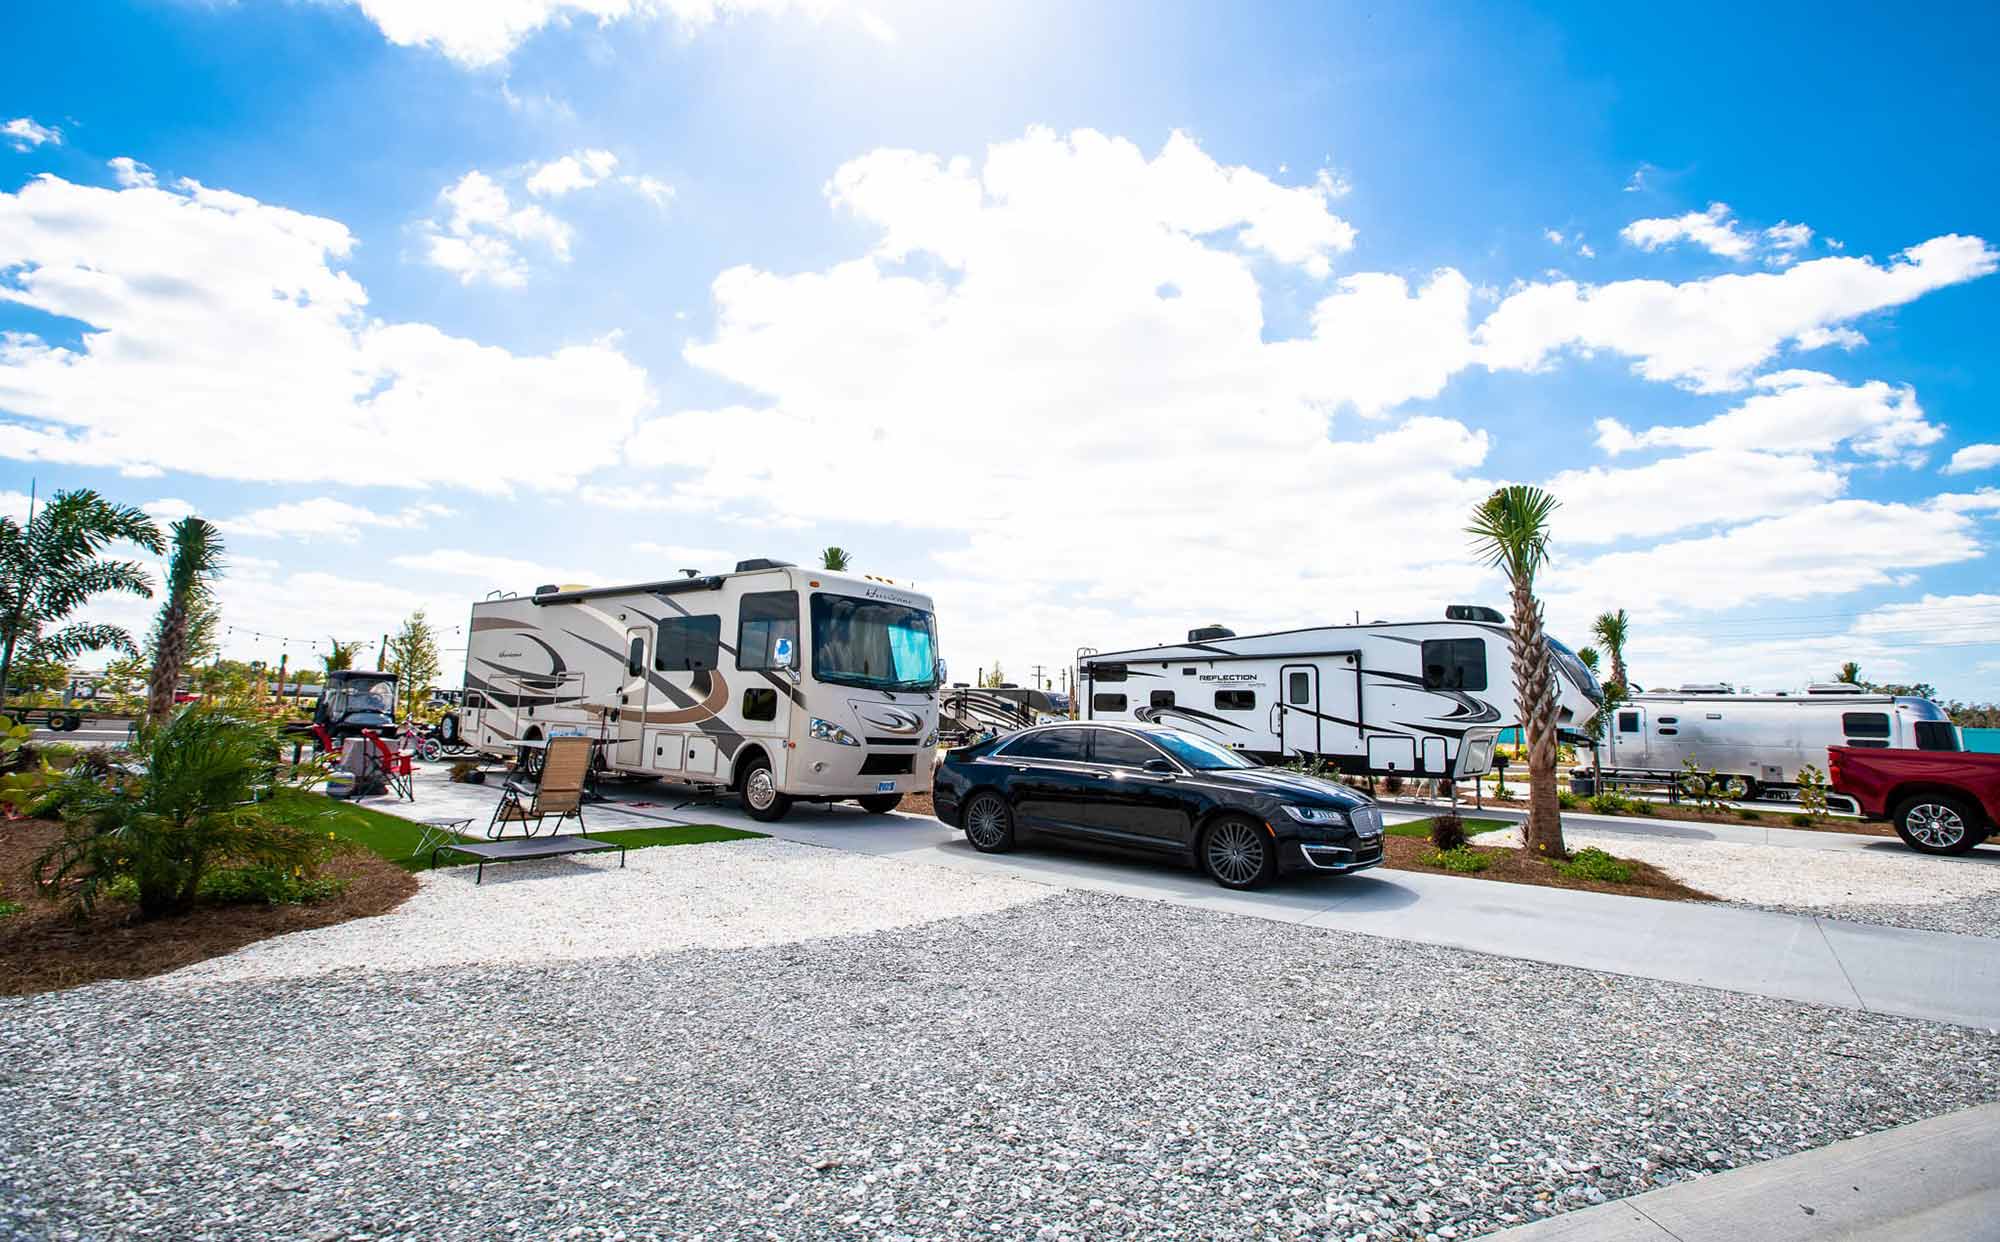 RVs and campers at Cabana Club Resort in Auburndale Florida